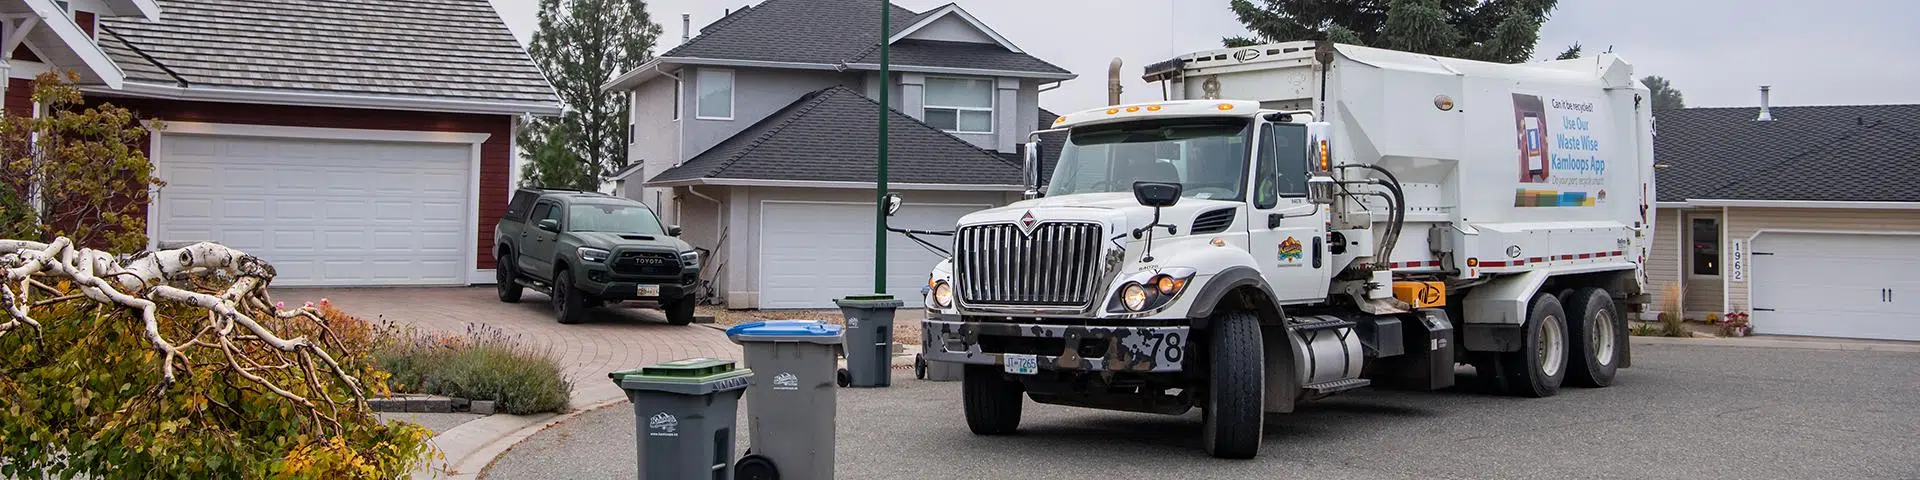 Kamloops council to discuss expansion of organic waste pilot, bear proof bins